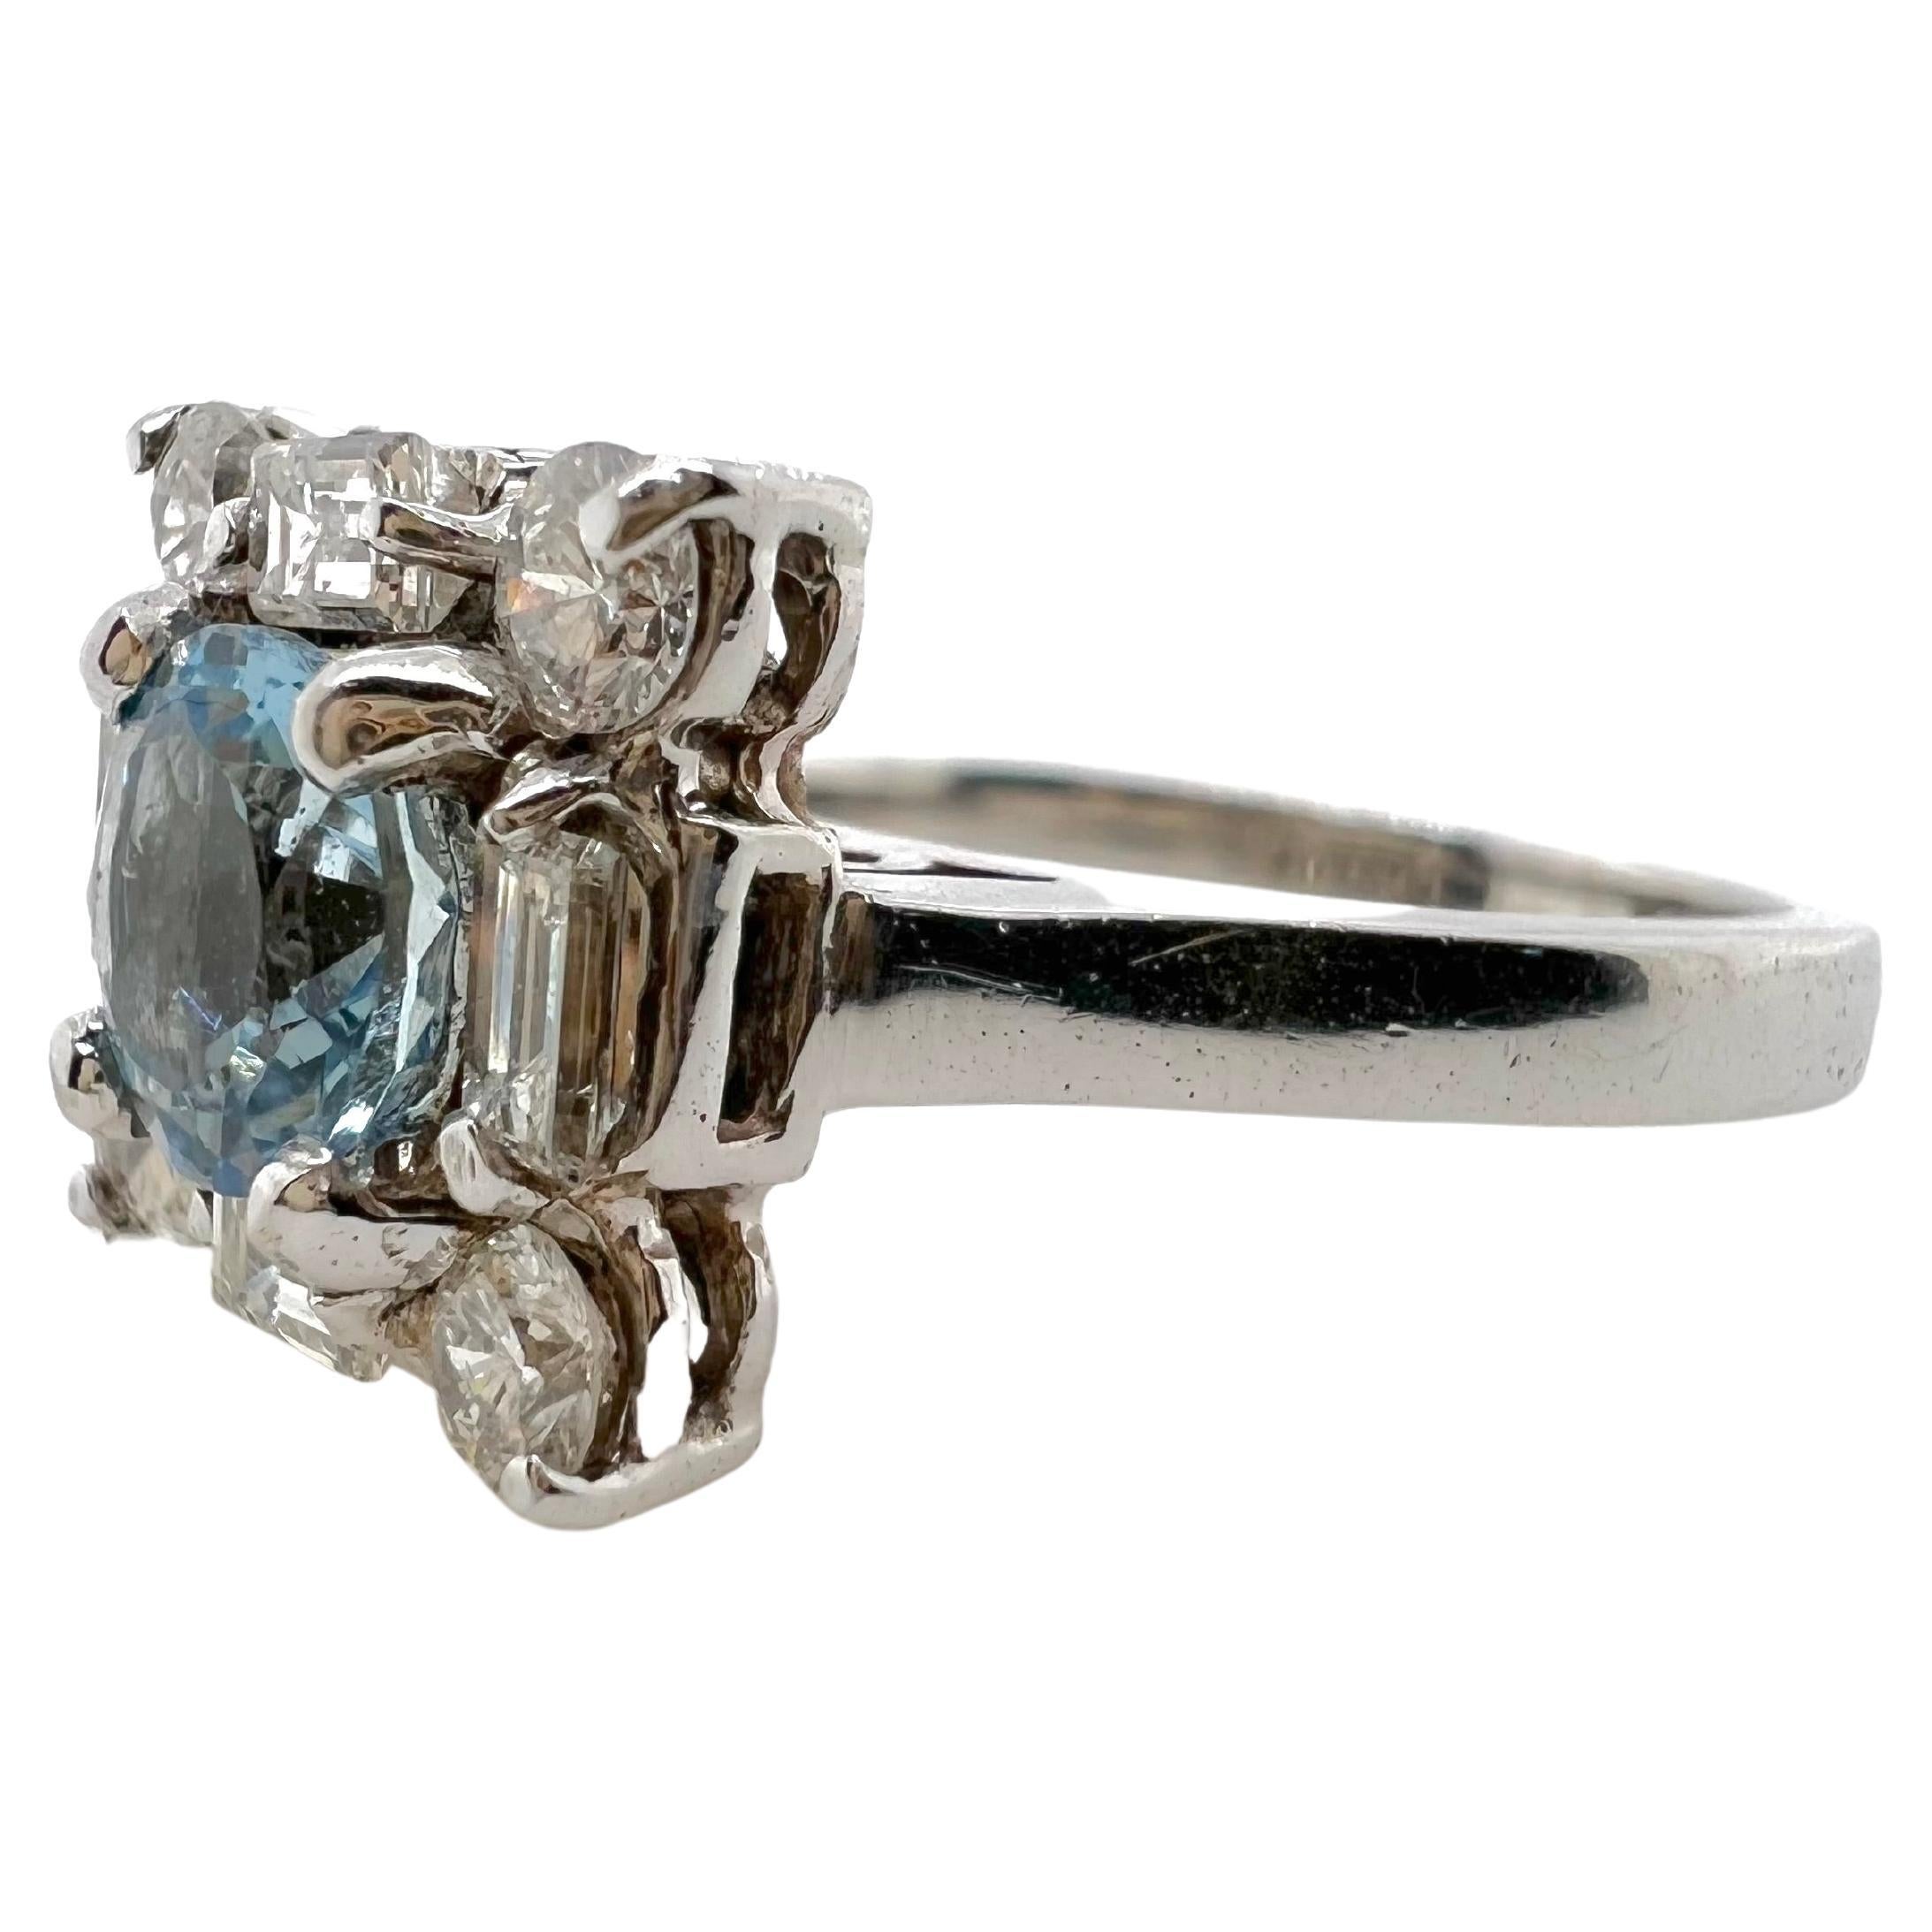 Gorgeous aquamarine!  This vibrant crisp blue hue aquamarine is set in a 14k white gold mounting with baguette and round diamonds.  This seawater color blue, is eye-catching. 


Size: 5.5
Stone: Aquamarine 0.75 ct
Diamonds: 0.80 ct total